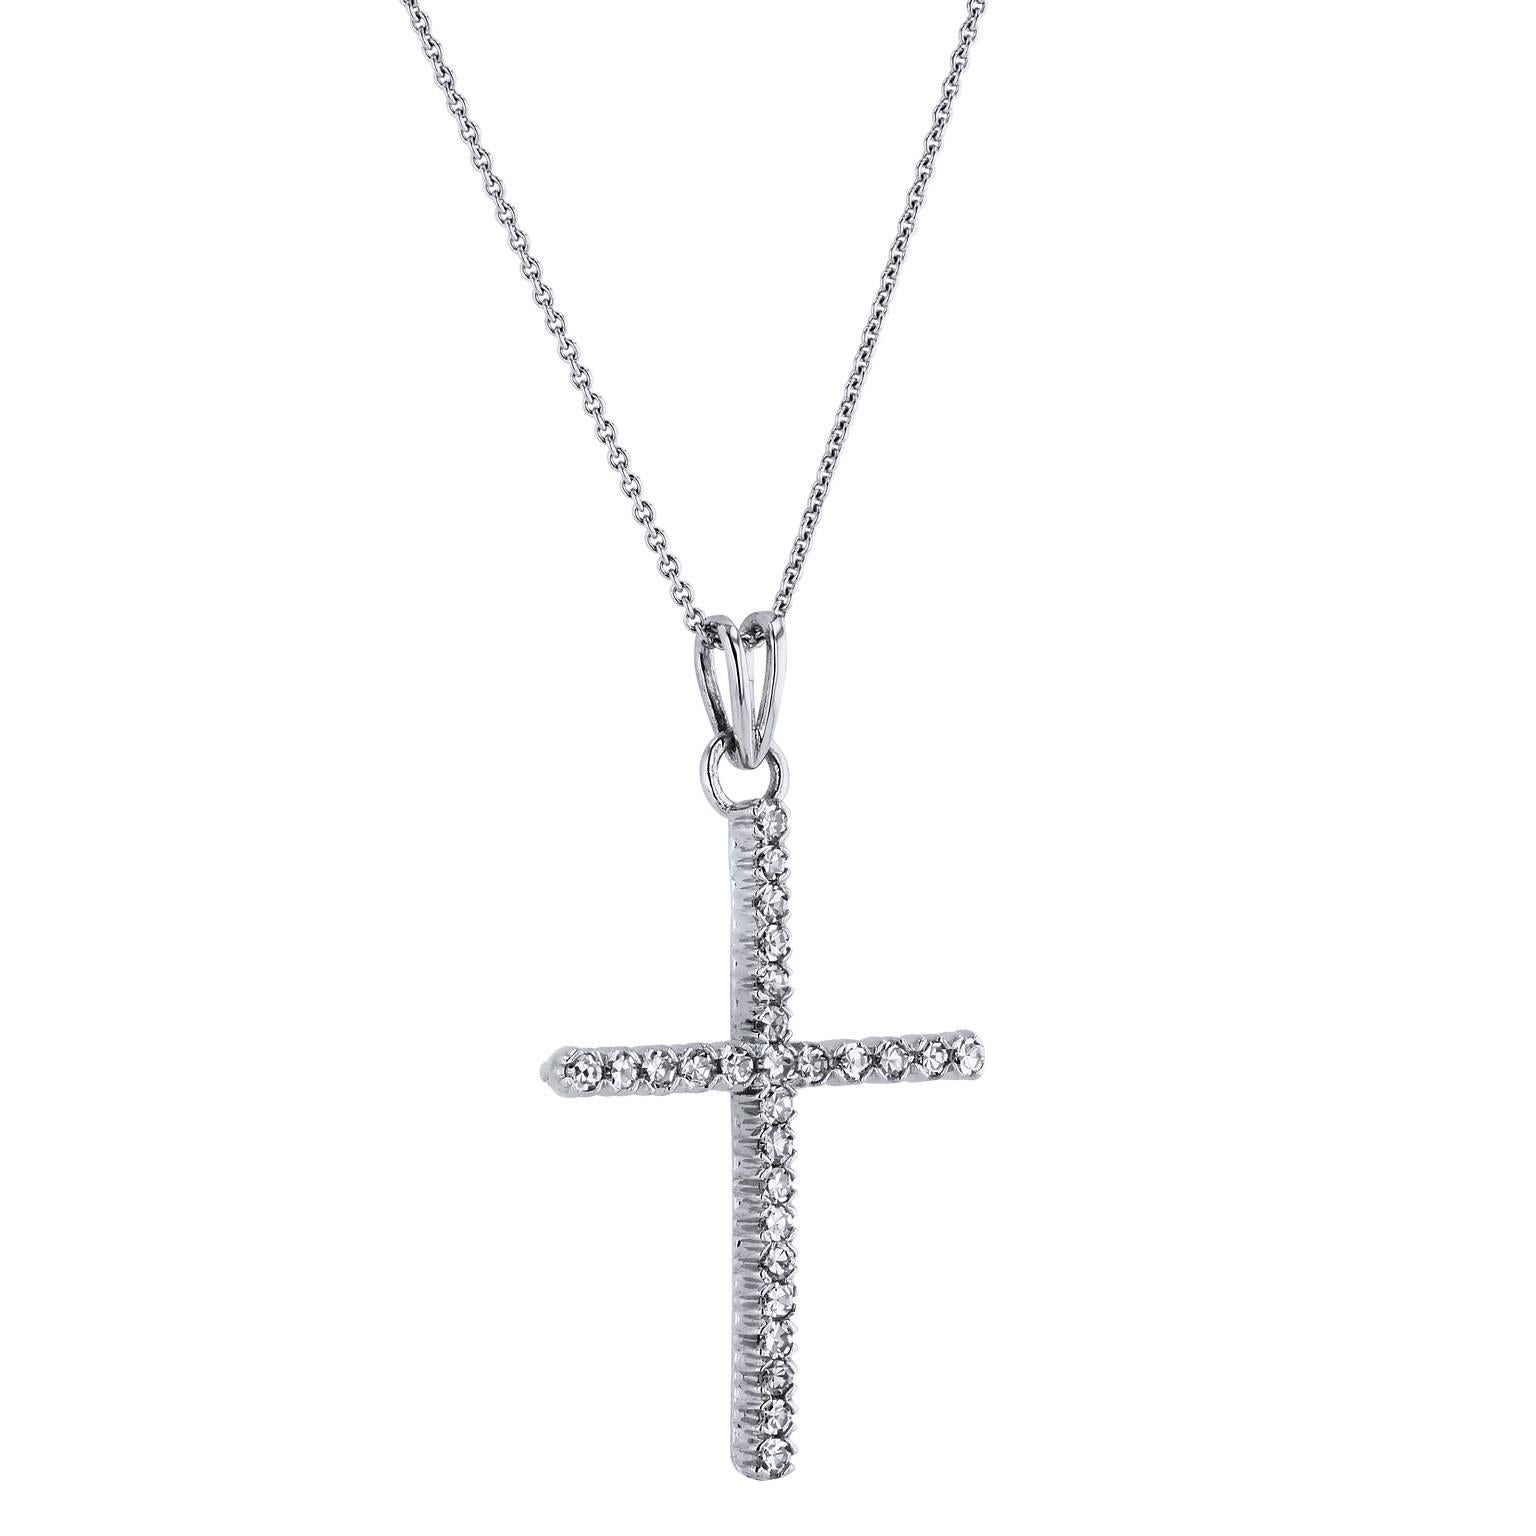 Enjoy this previously loved 18 karat white gold cross pendant (necklace is sold separately) featuring a total weight of 0.50 carat of single cut diamonds (H/I/VS2) prong set.